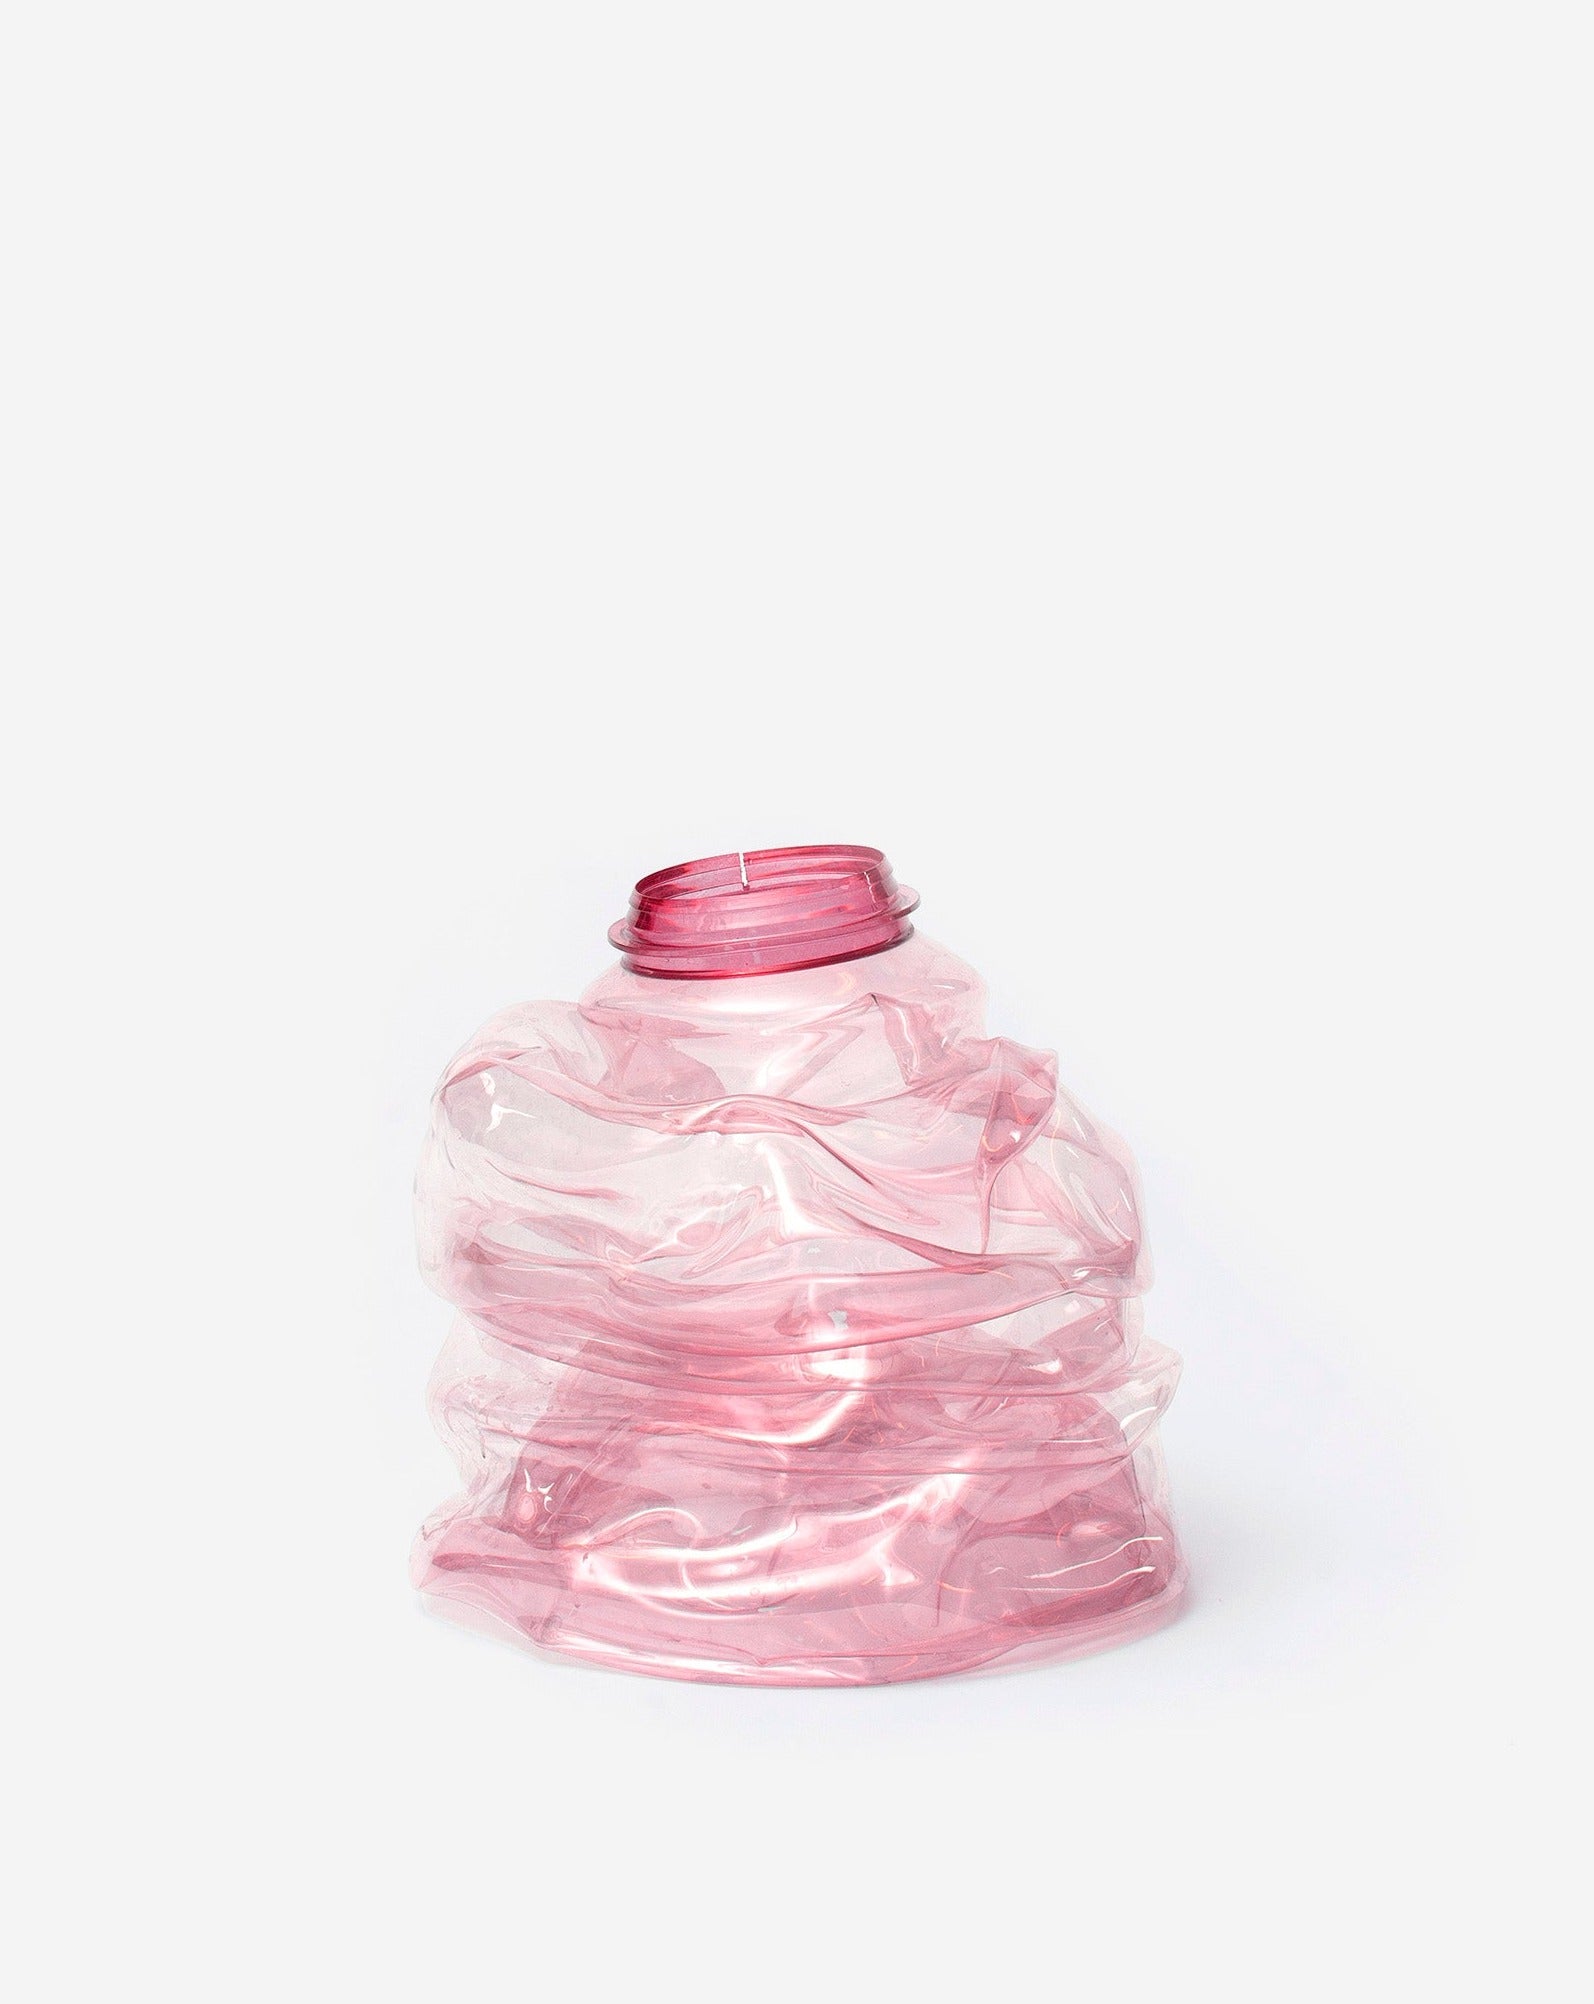 Small pink handmade recycled plastic vase on white background